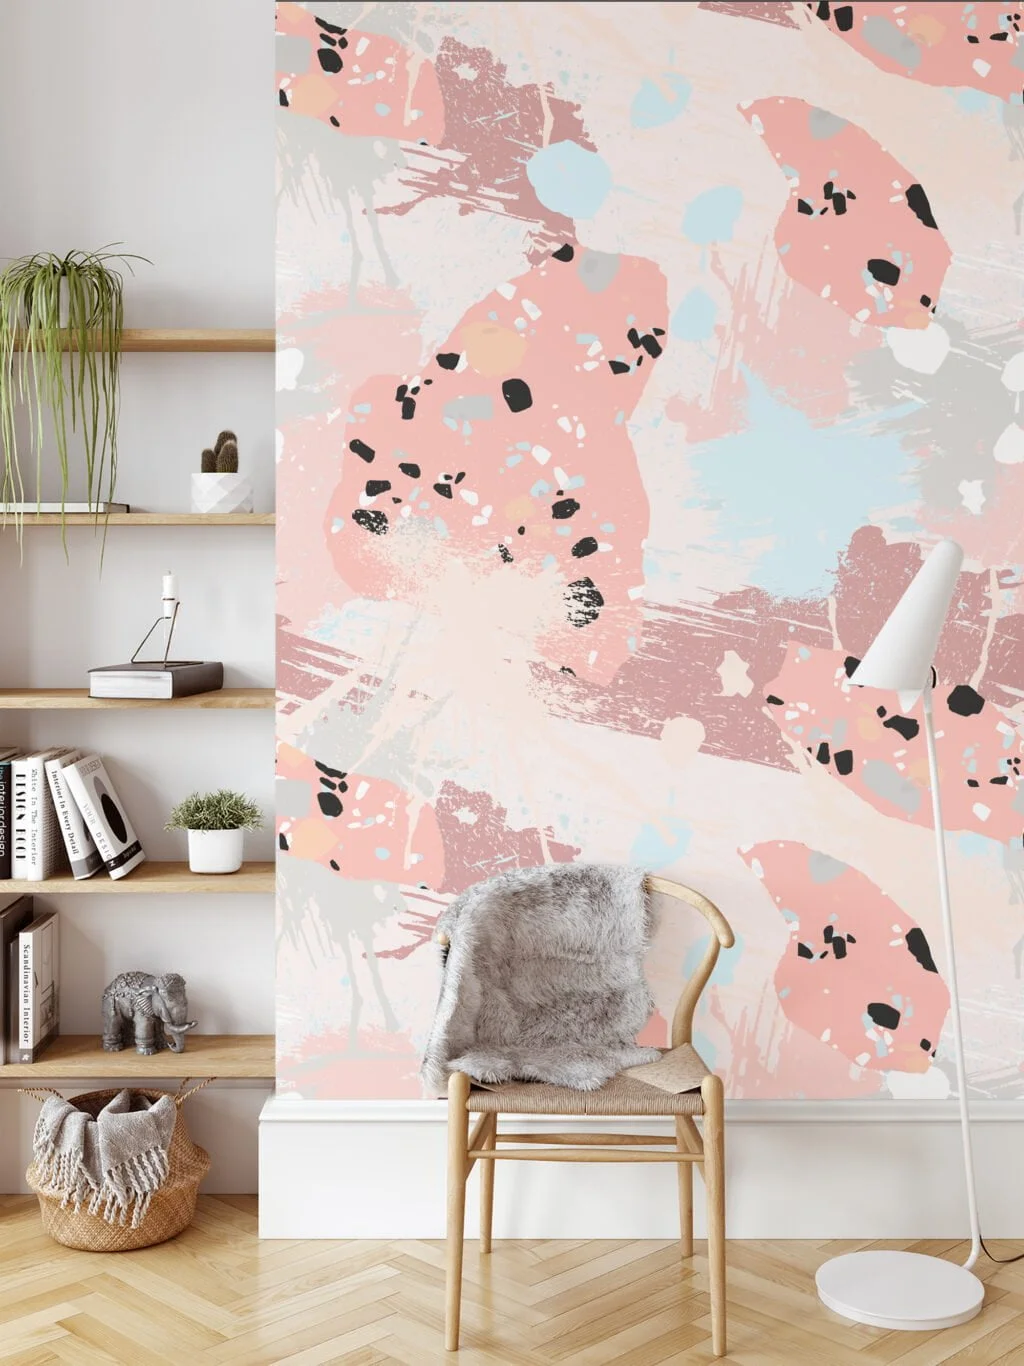 Abstract Peach Splashes Illustration Wallpaper, Abstract Brush Strokes & Speckles Peel & Stick Wall Mural